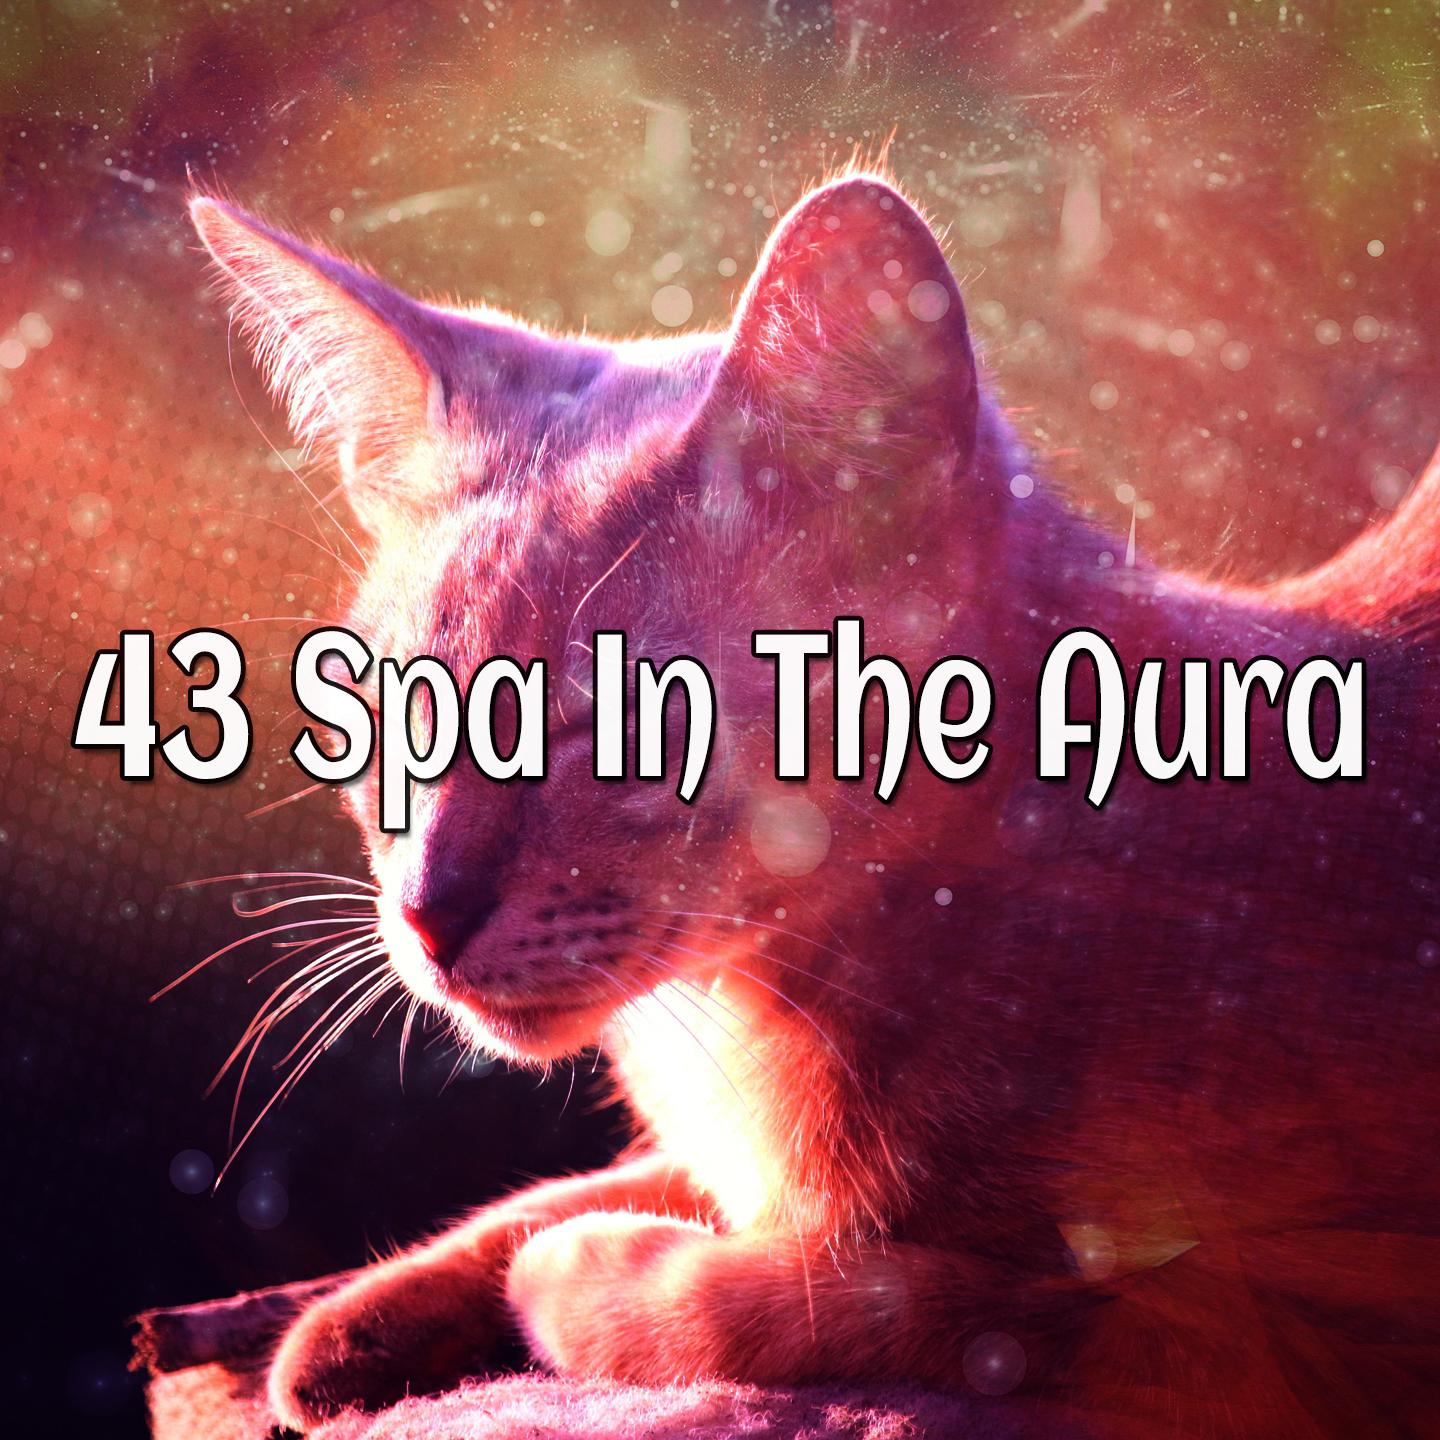 43 Spa In The Aura